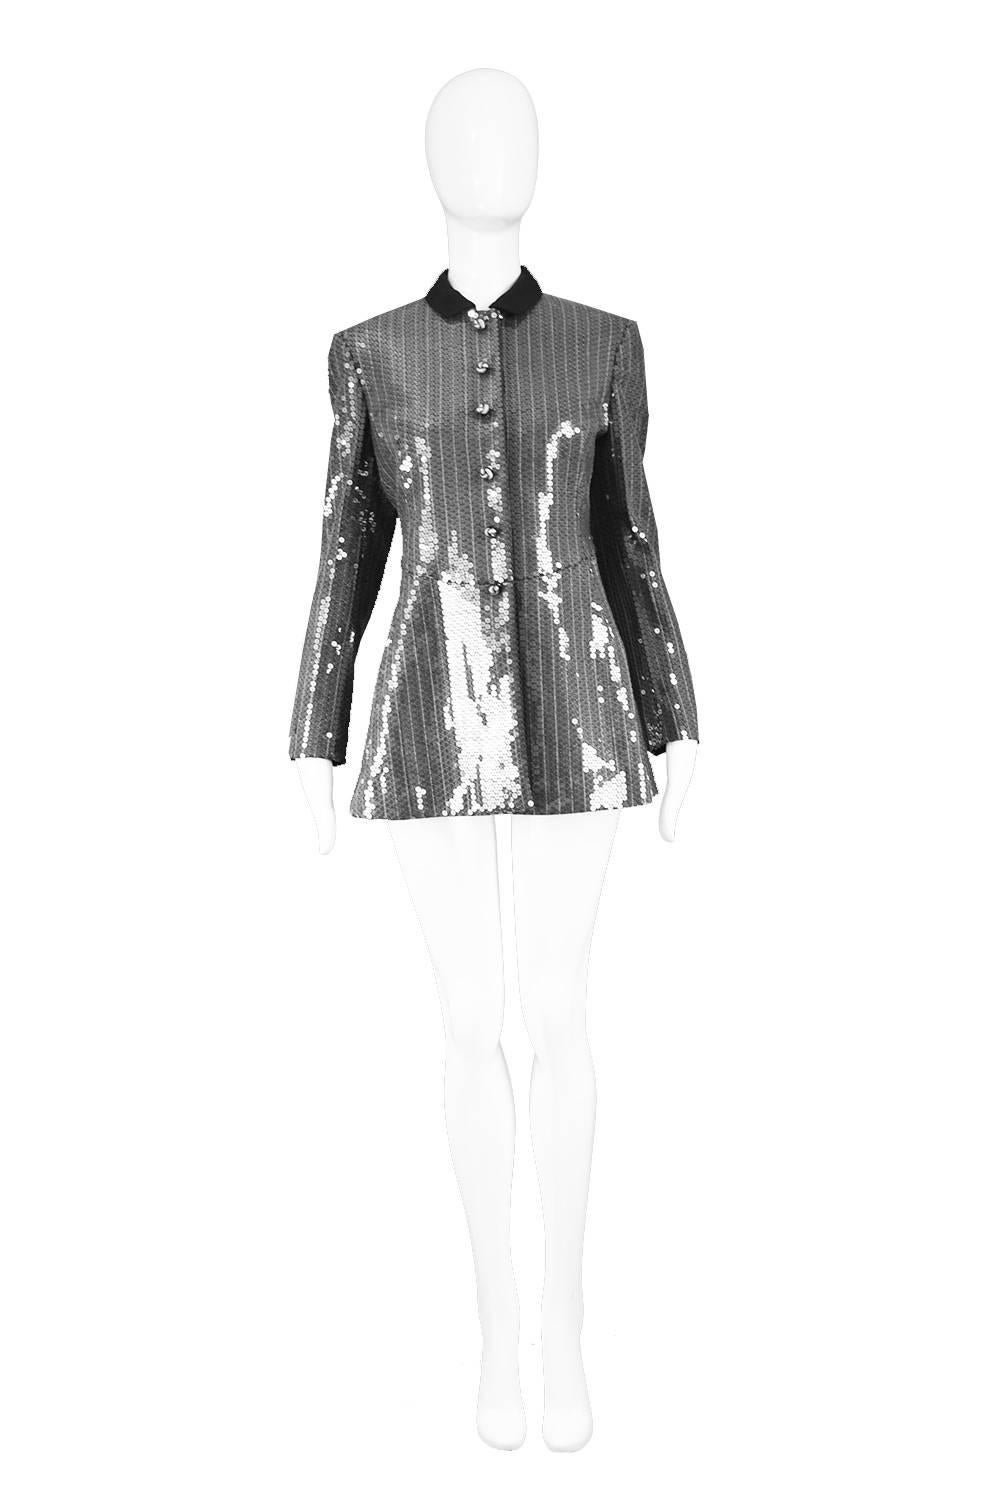 Moschino Couture Clear / Silver Sequinned Striped Tailored Military Jacket

Size: Marked GB 10 / US 8 / I 42 / D 38
Bust - 34” / 96cm
Waist - 30” / 76cm
Hips - 38” / 96cm
Length (Shoulder to Hem) - 27” / 68cm
Shoulder to Shoulder - 16” / 40cm
Sleeve